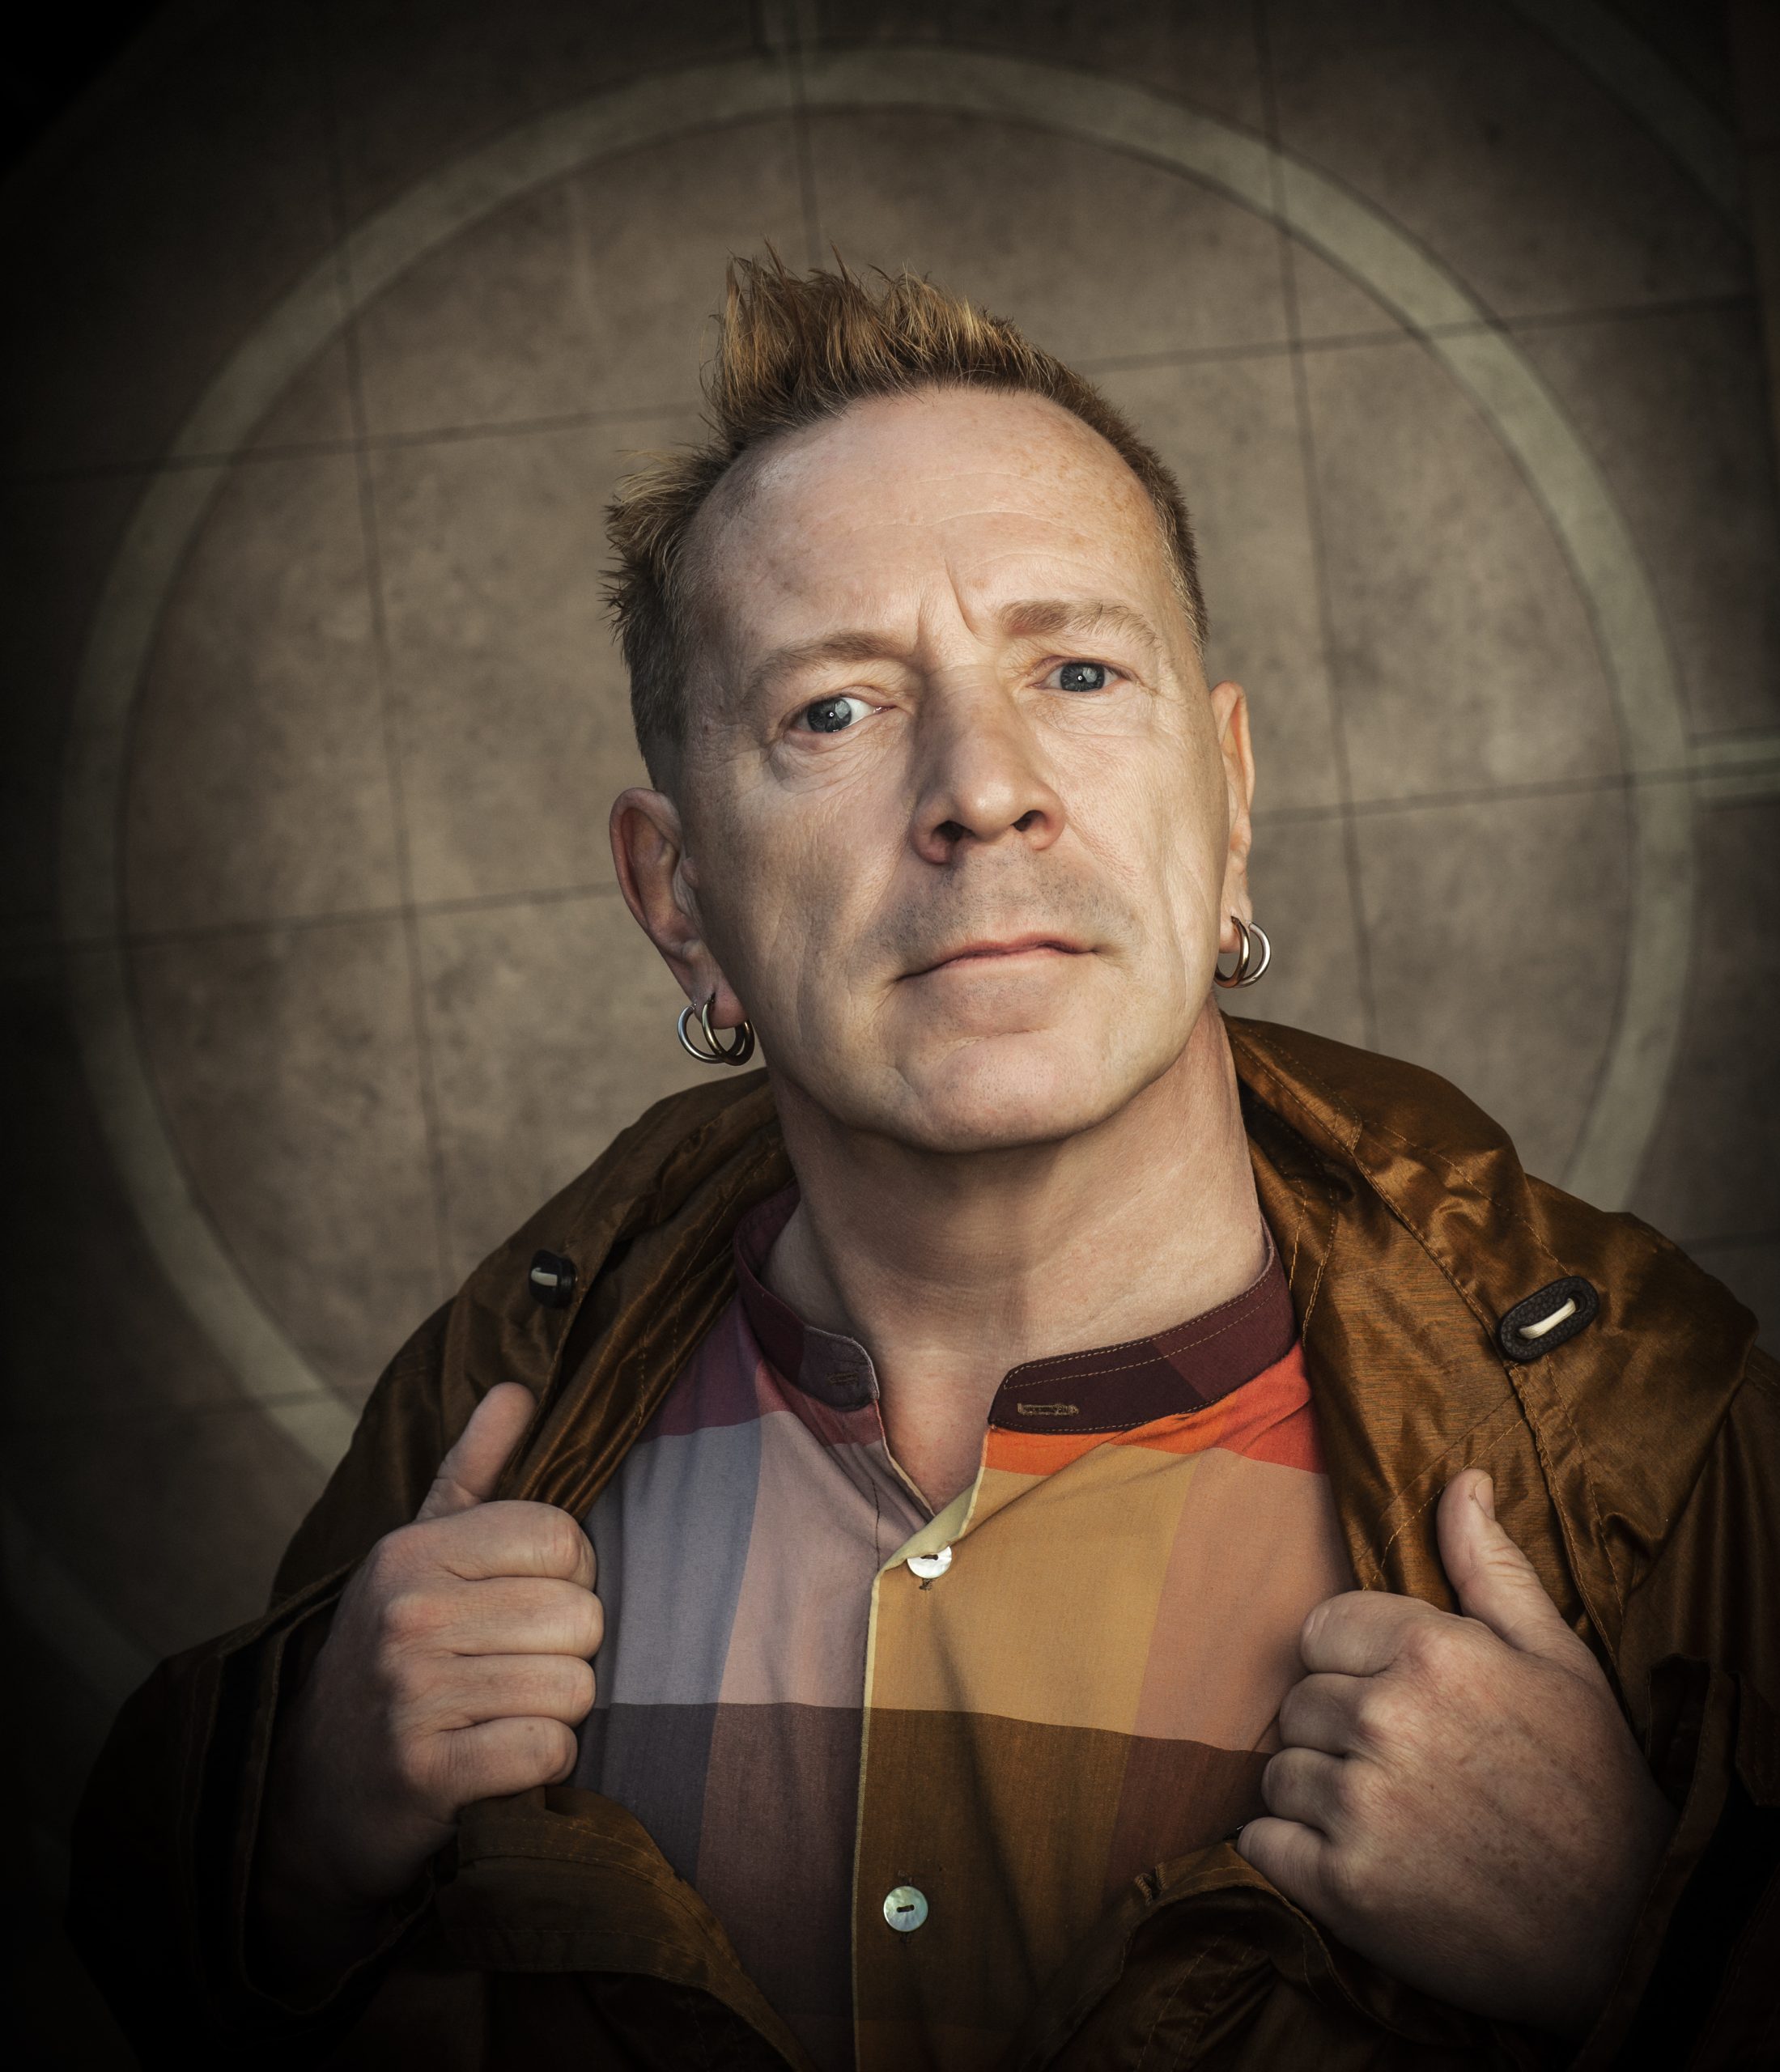 John Lydon - I Could Be Wrong, I Could Be Right - Stirling Events